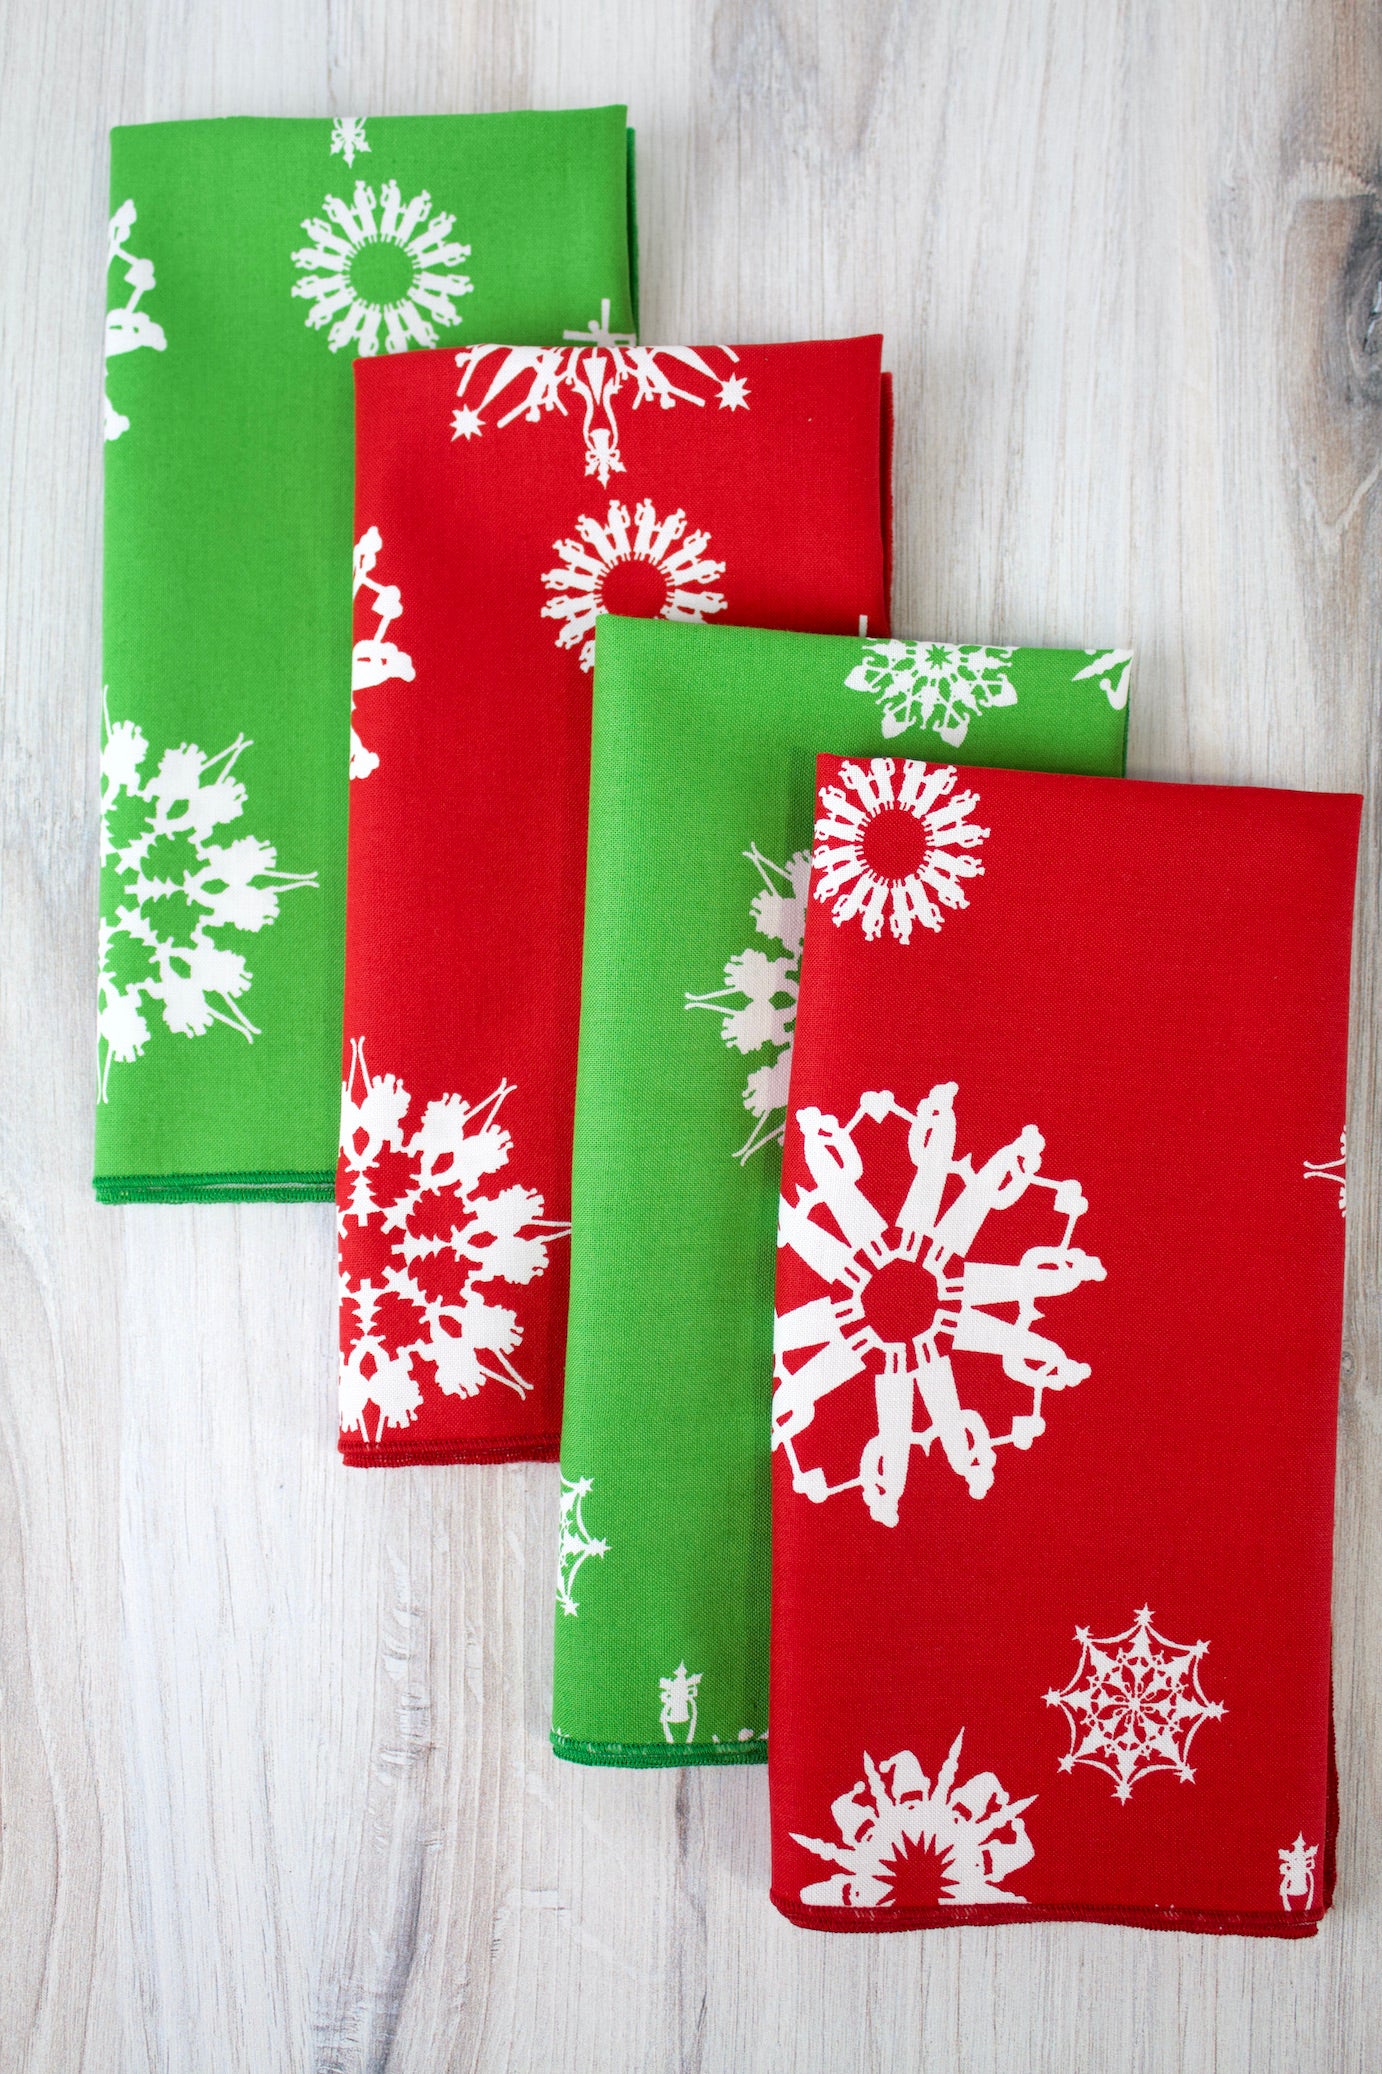 Folksy Flakes Christmas Napkins (Set of 4)-The Blue Peony-Category_Napkins,Category_Table Linens,Color_Green,Color_Red,Department_Kitchen,Material_Cotton,Theme_Christmas,Theme_Winter